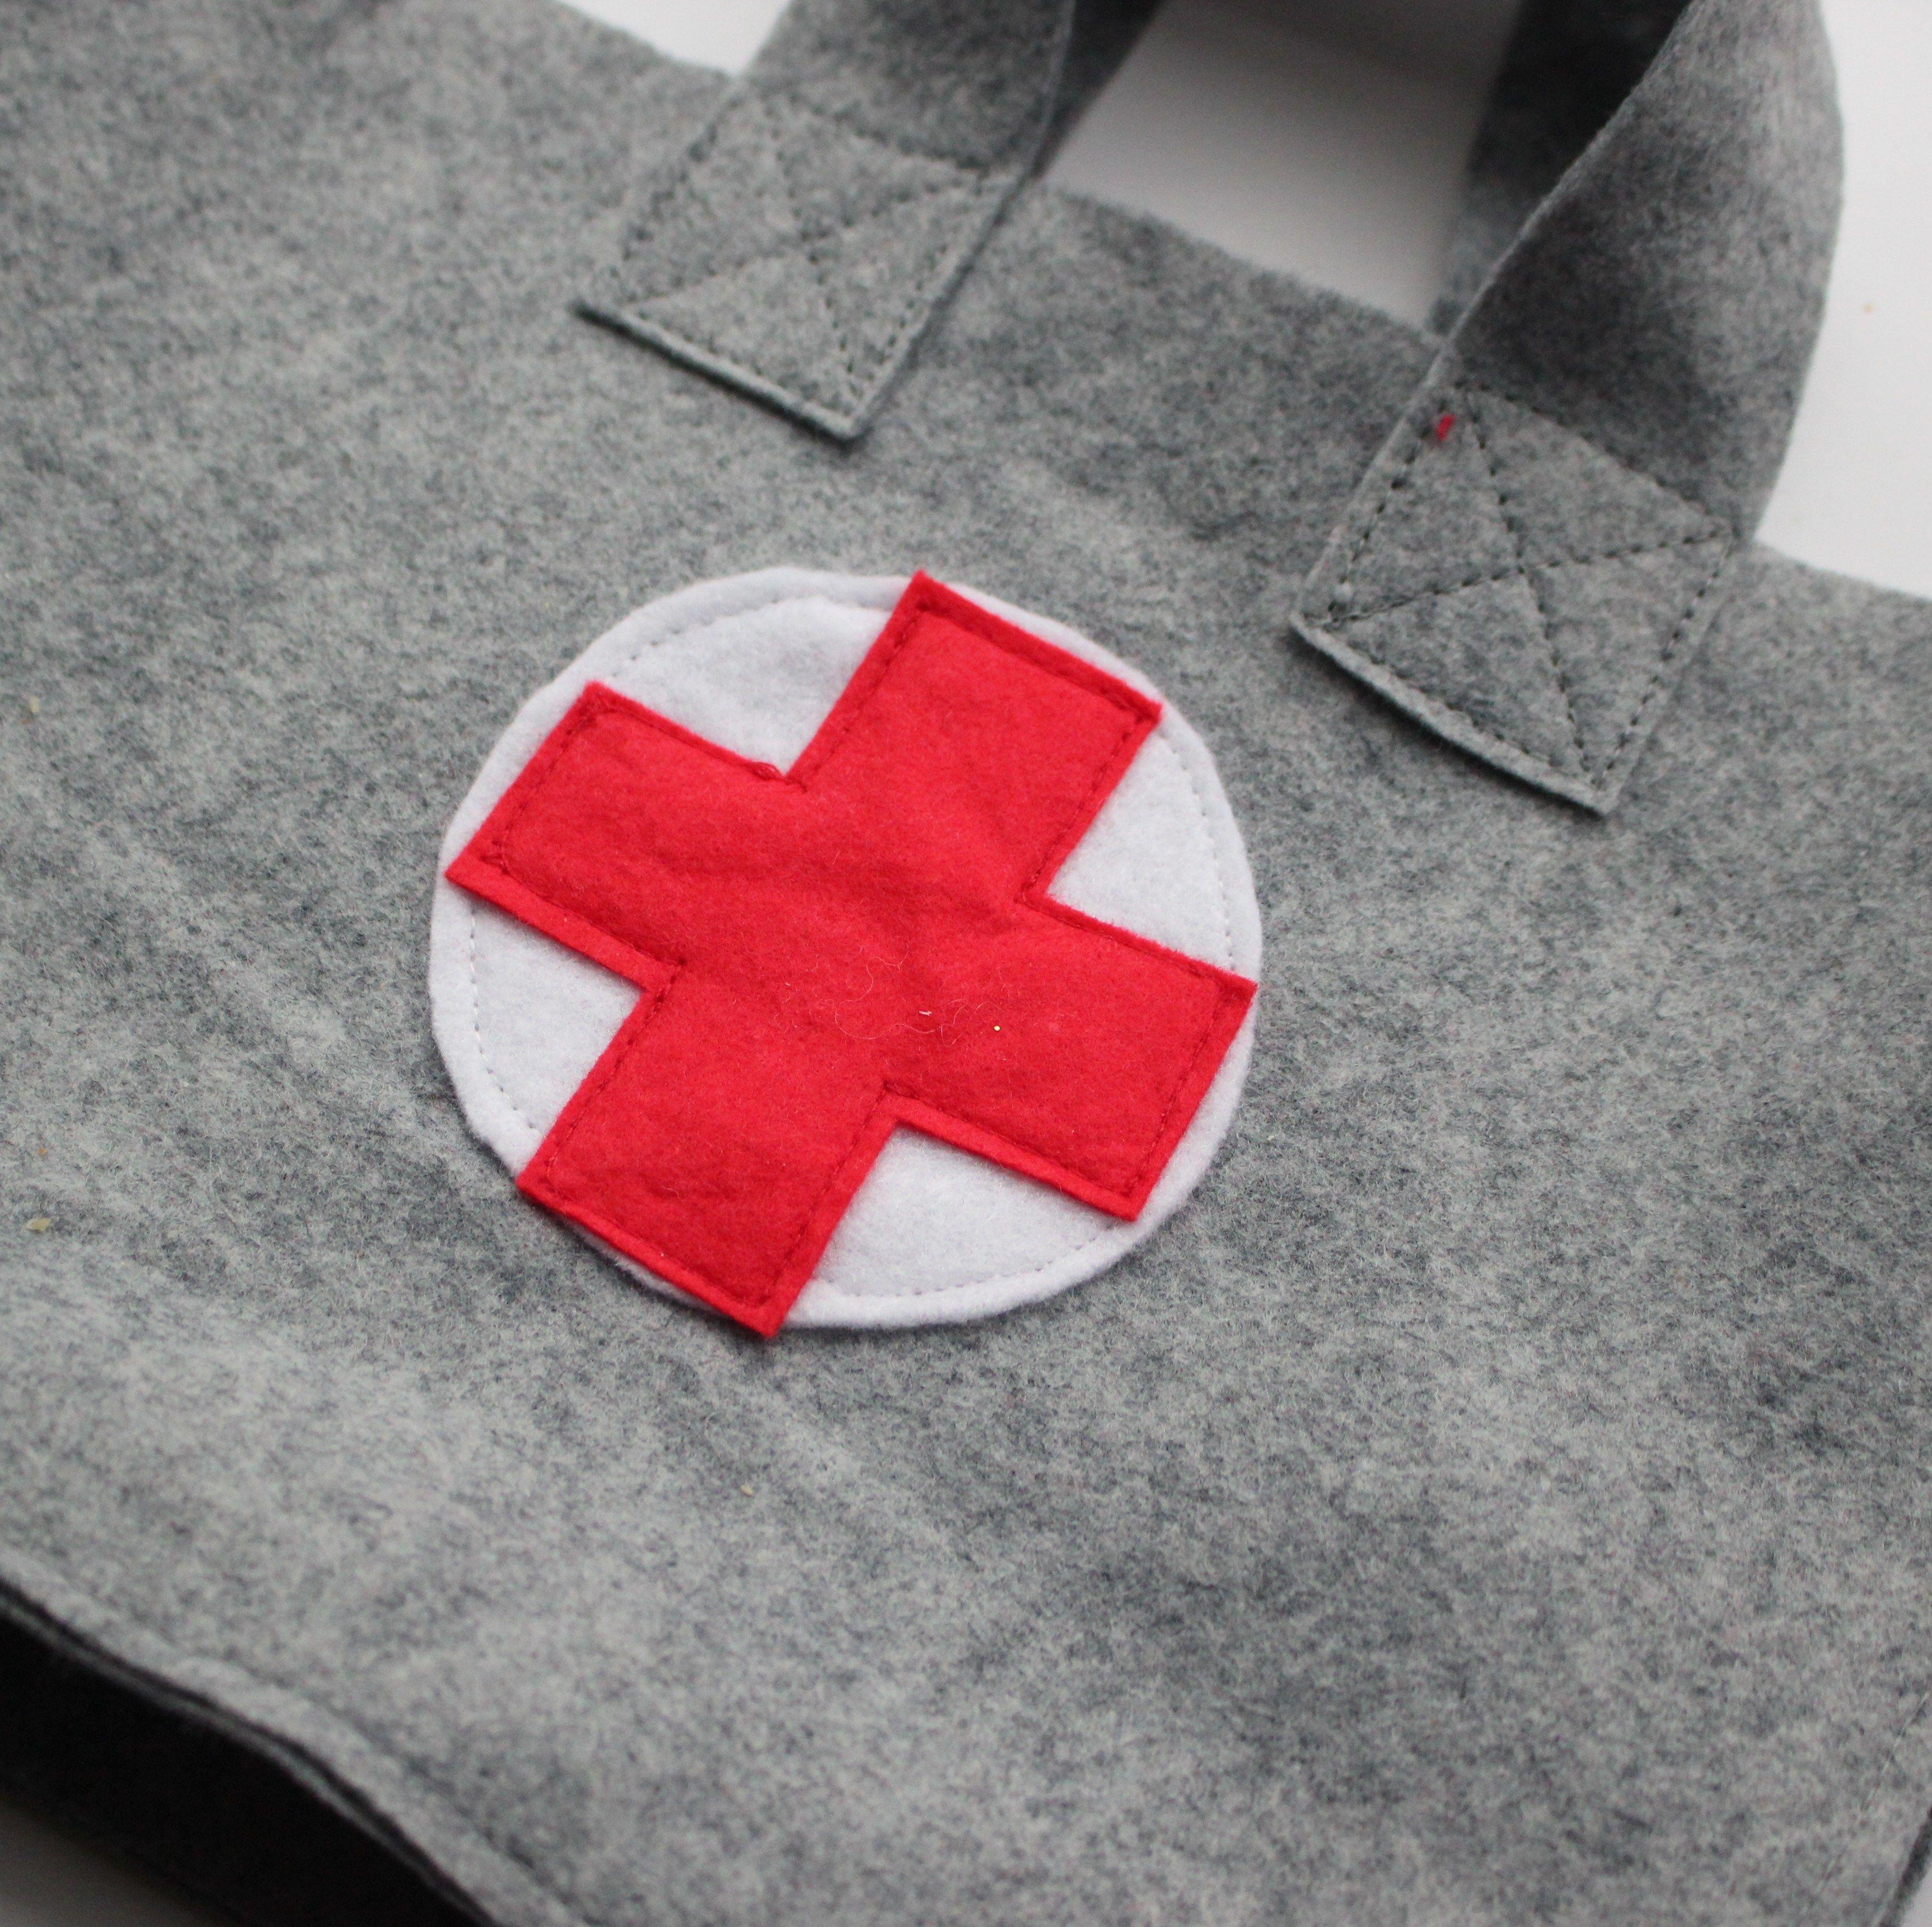 Sewing Red Cross Logo - DIY Toy Medical Kit - Little Button Diaries